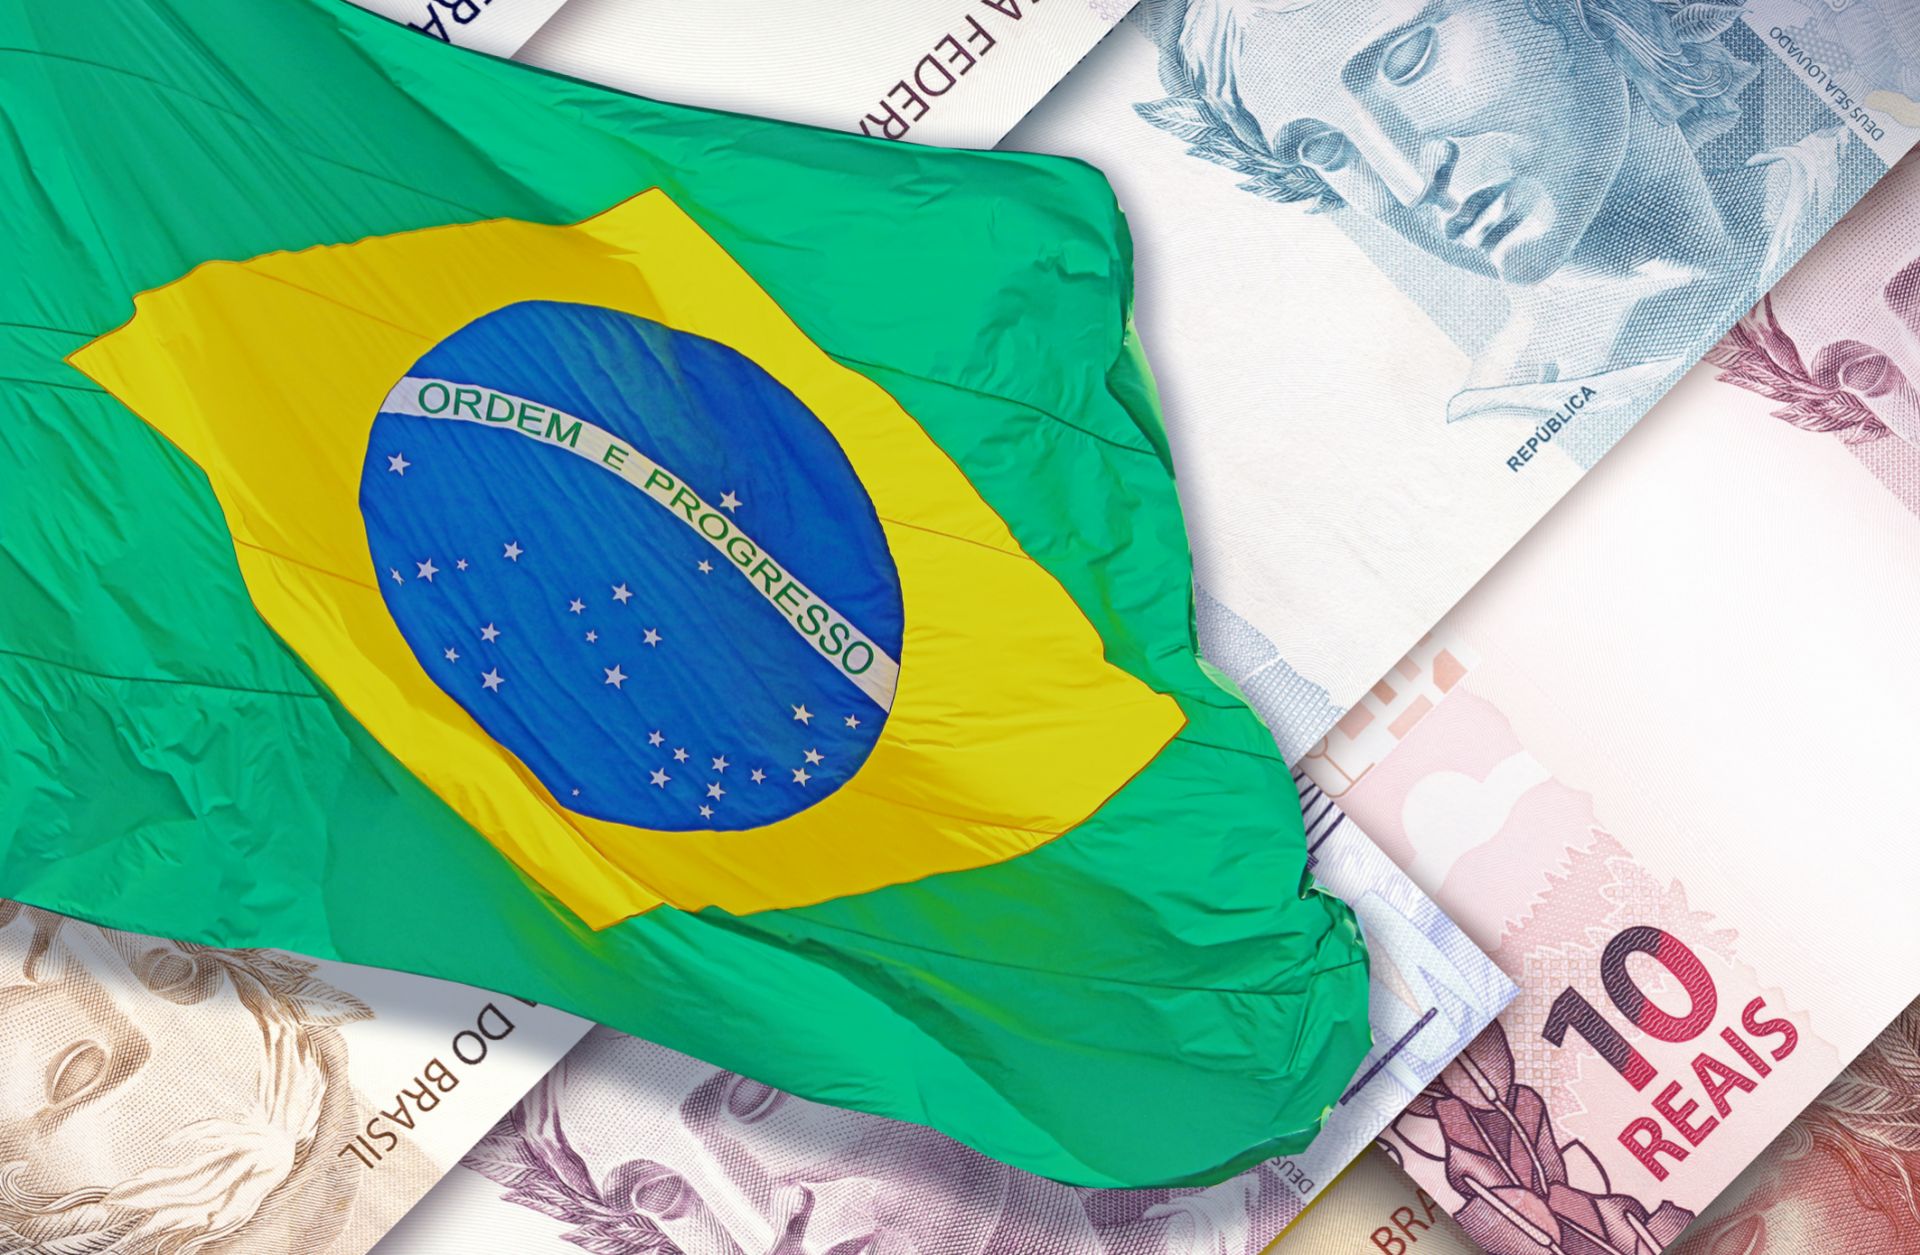 The Brazilian economy is back in the black and may be headed to an even greater economic recovery this year.